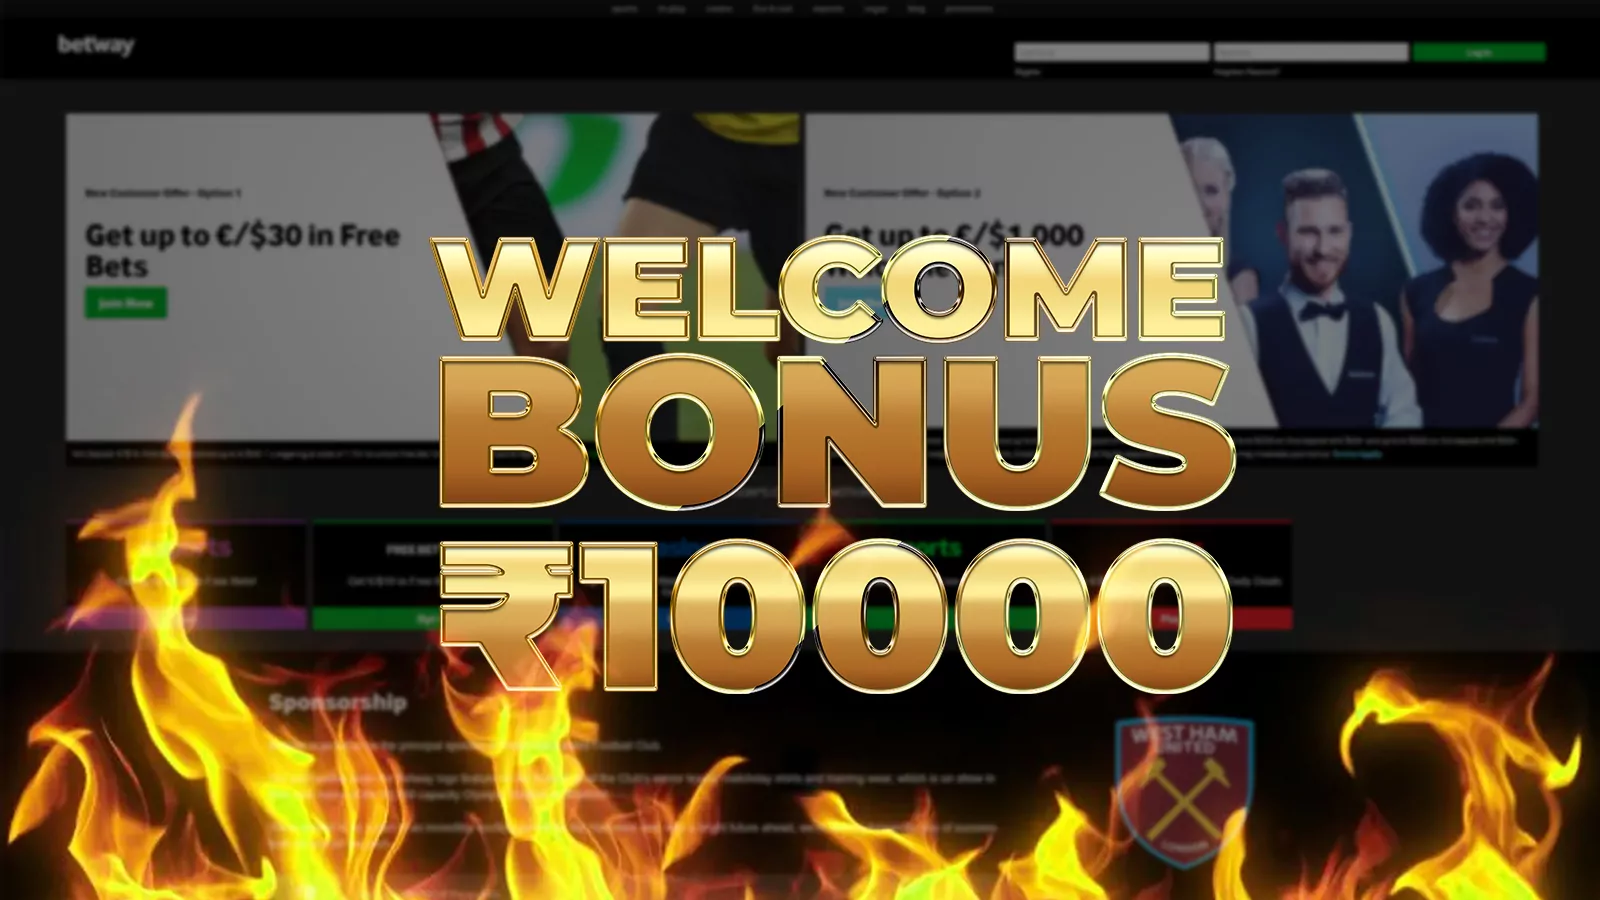 Sign up for Betway, make a deposit and claim for the welcome bonus.